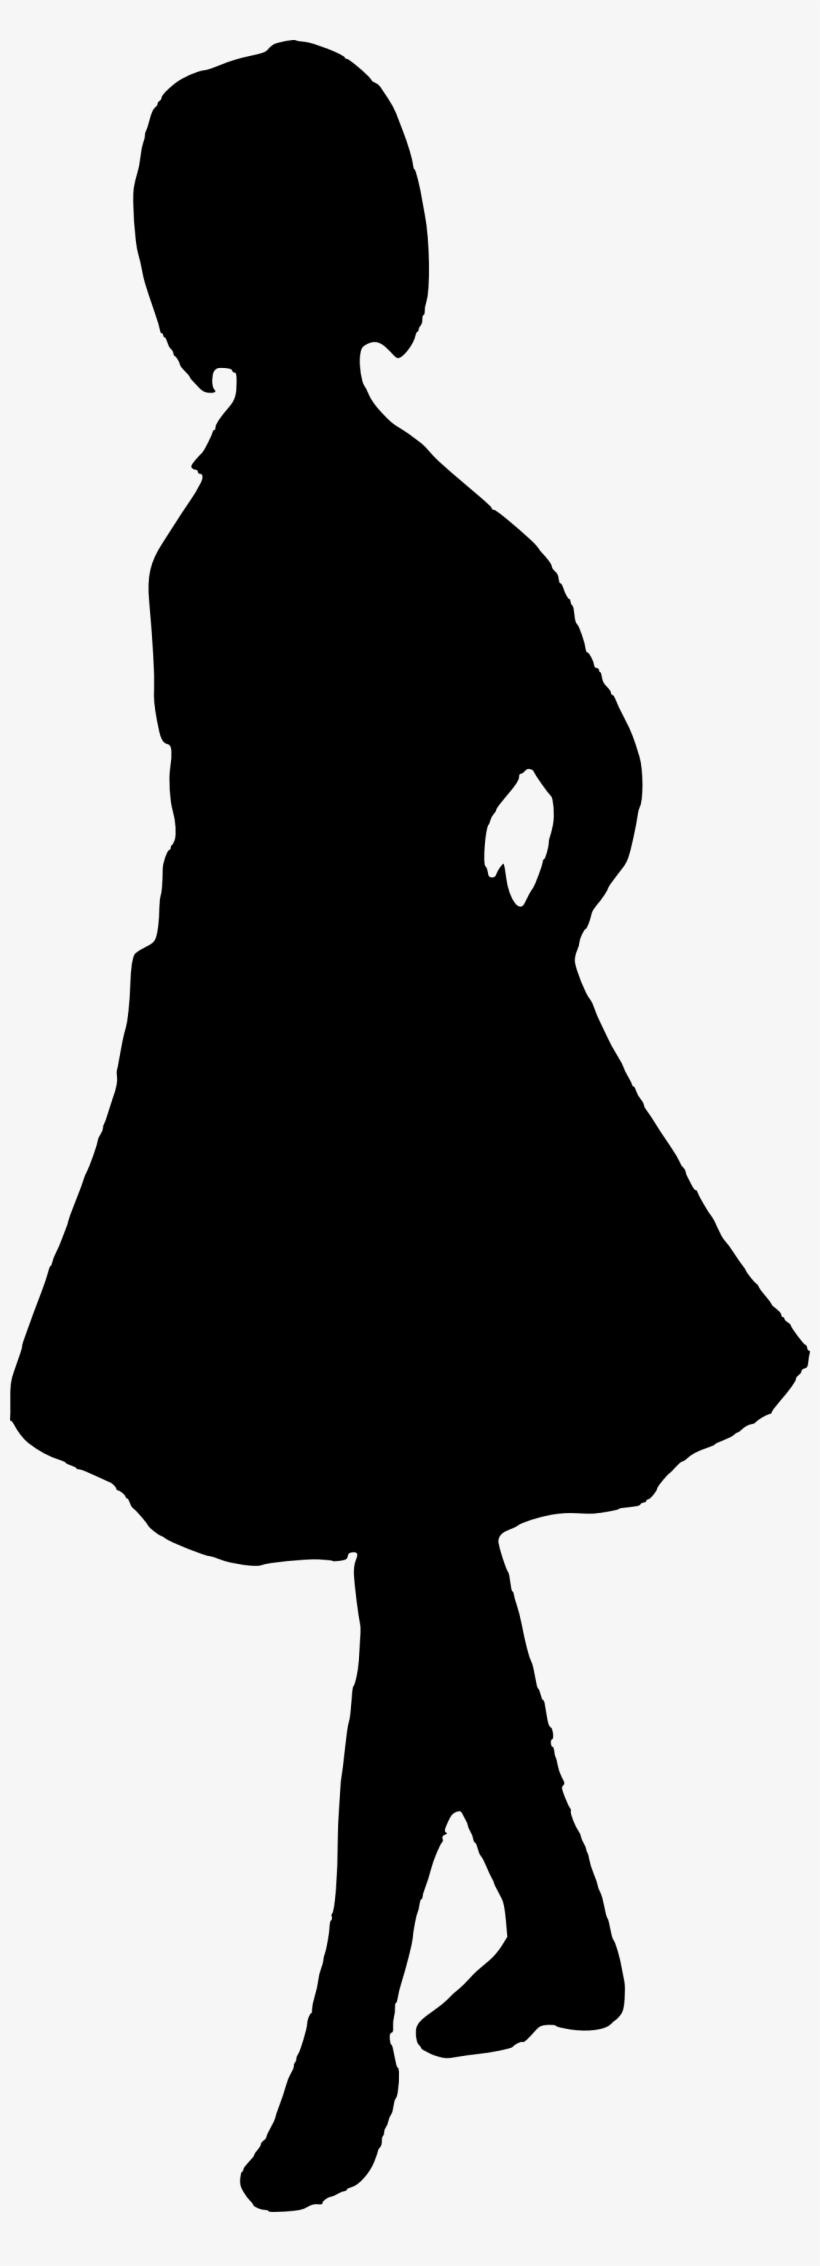 Free Download - Girl Silhouette Transparent Background, transparent png #1167029